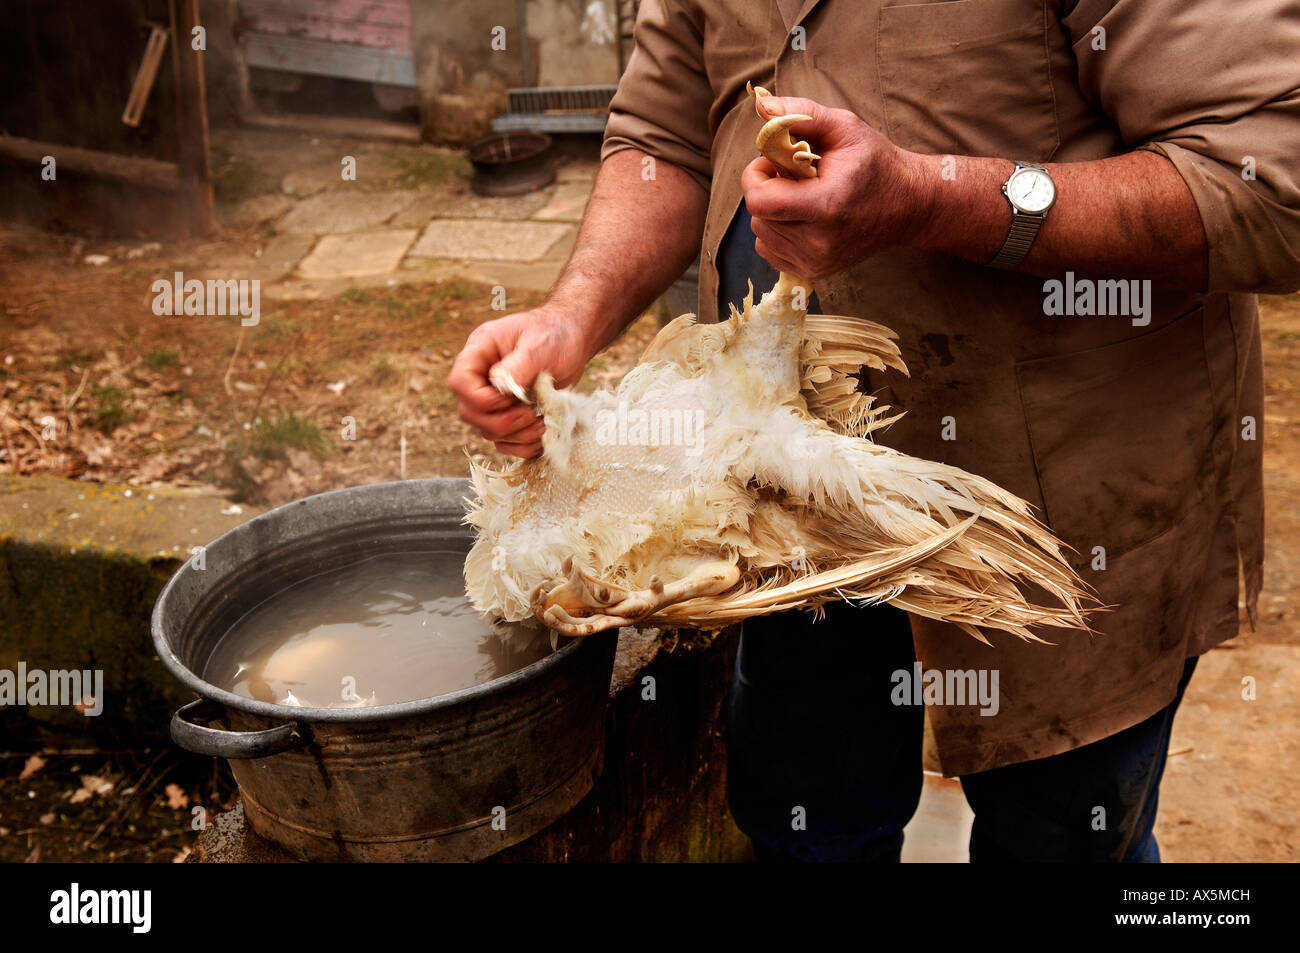 Home slaughtering (duck), farmer plucking the feathers from a duck, Eckental, Middle Franconia, Bavaria, Germany, Europe Stock Photo